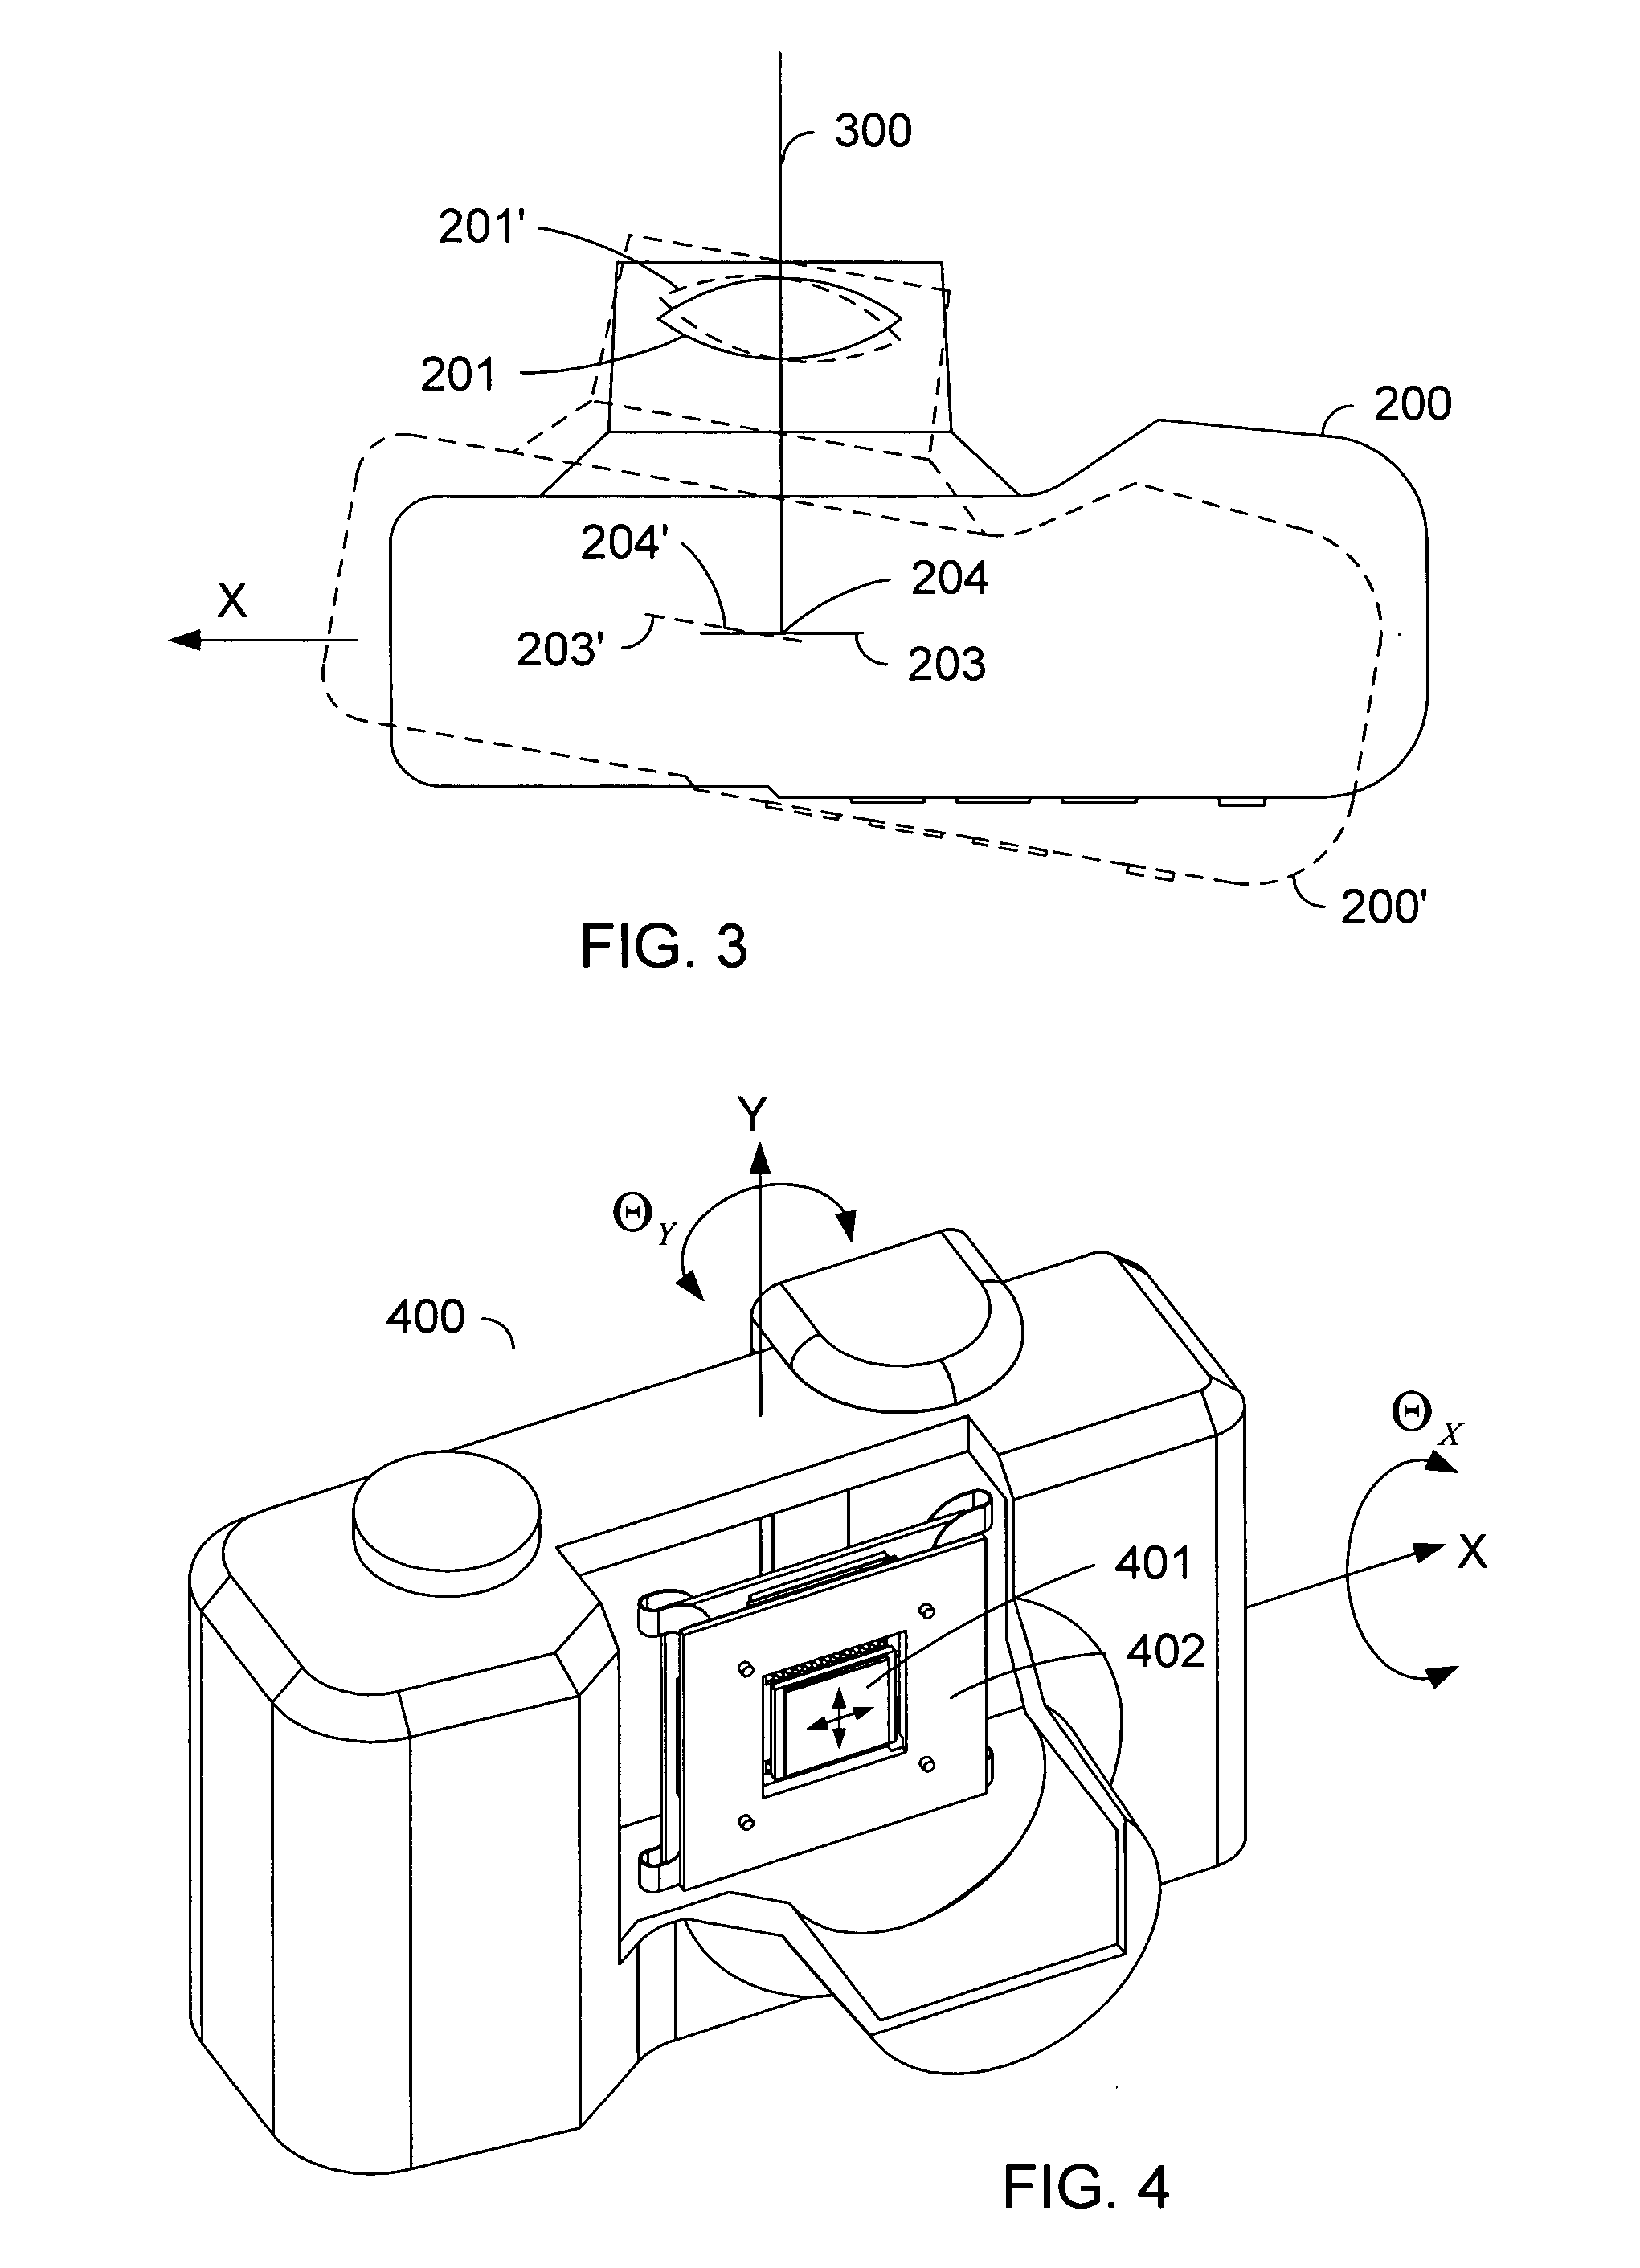 Method of compensating for an effect of temperature on a control system